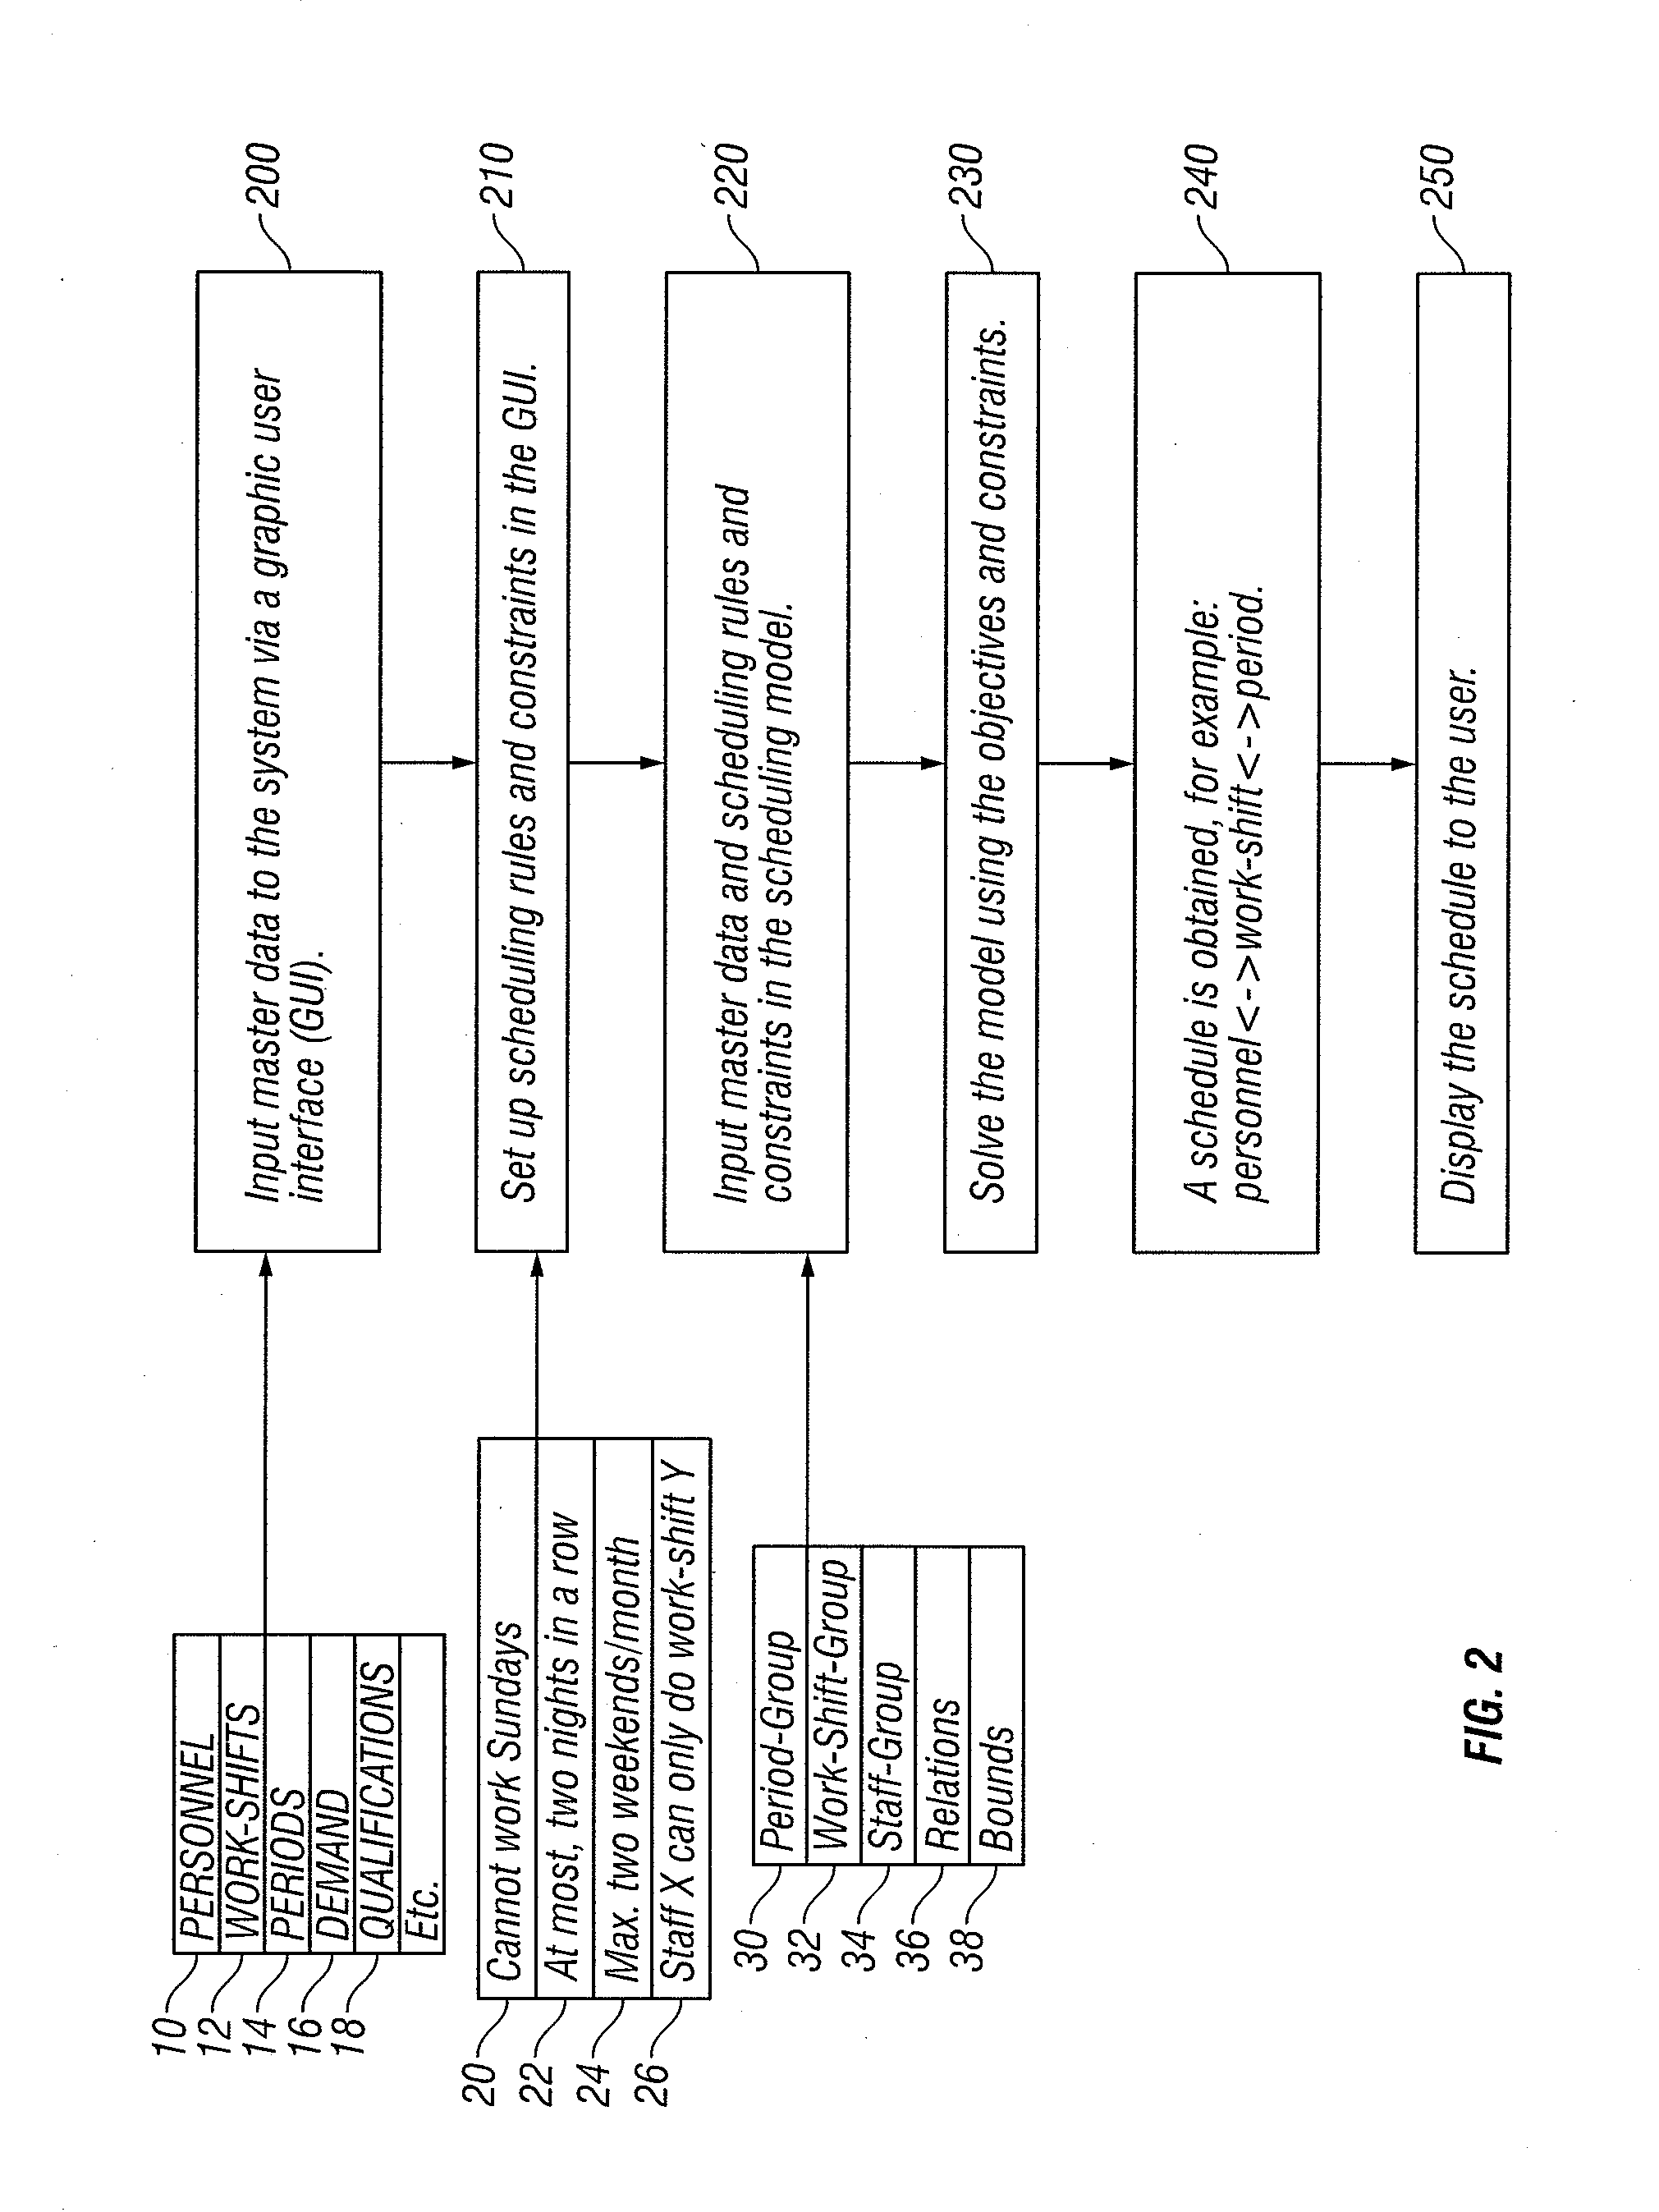 Method and Apparatus for Constraint-based Staff Scheduling